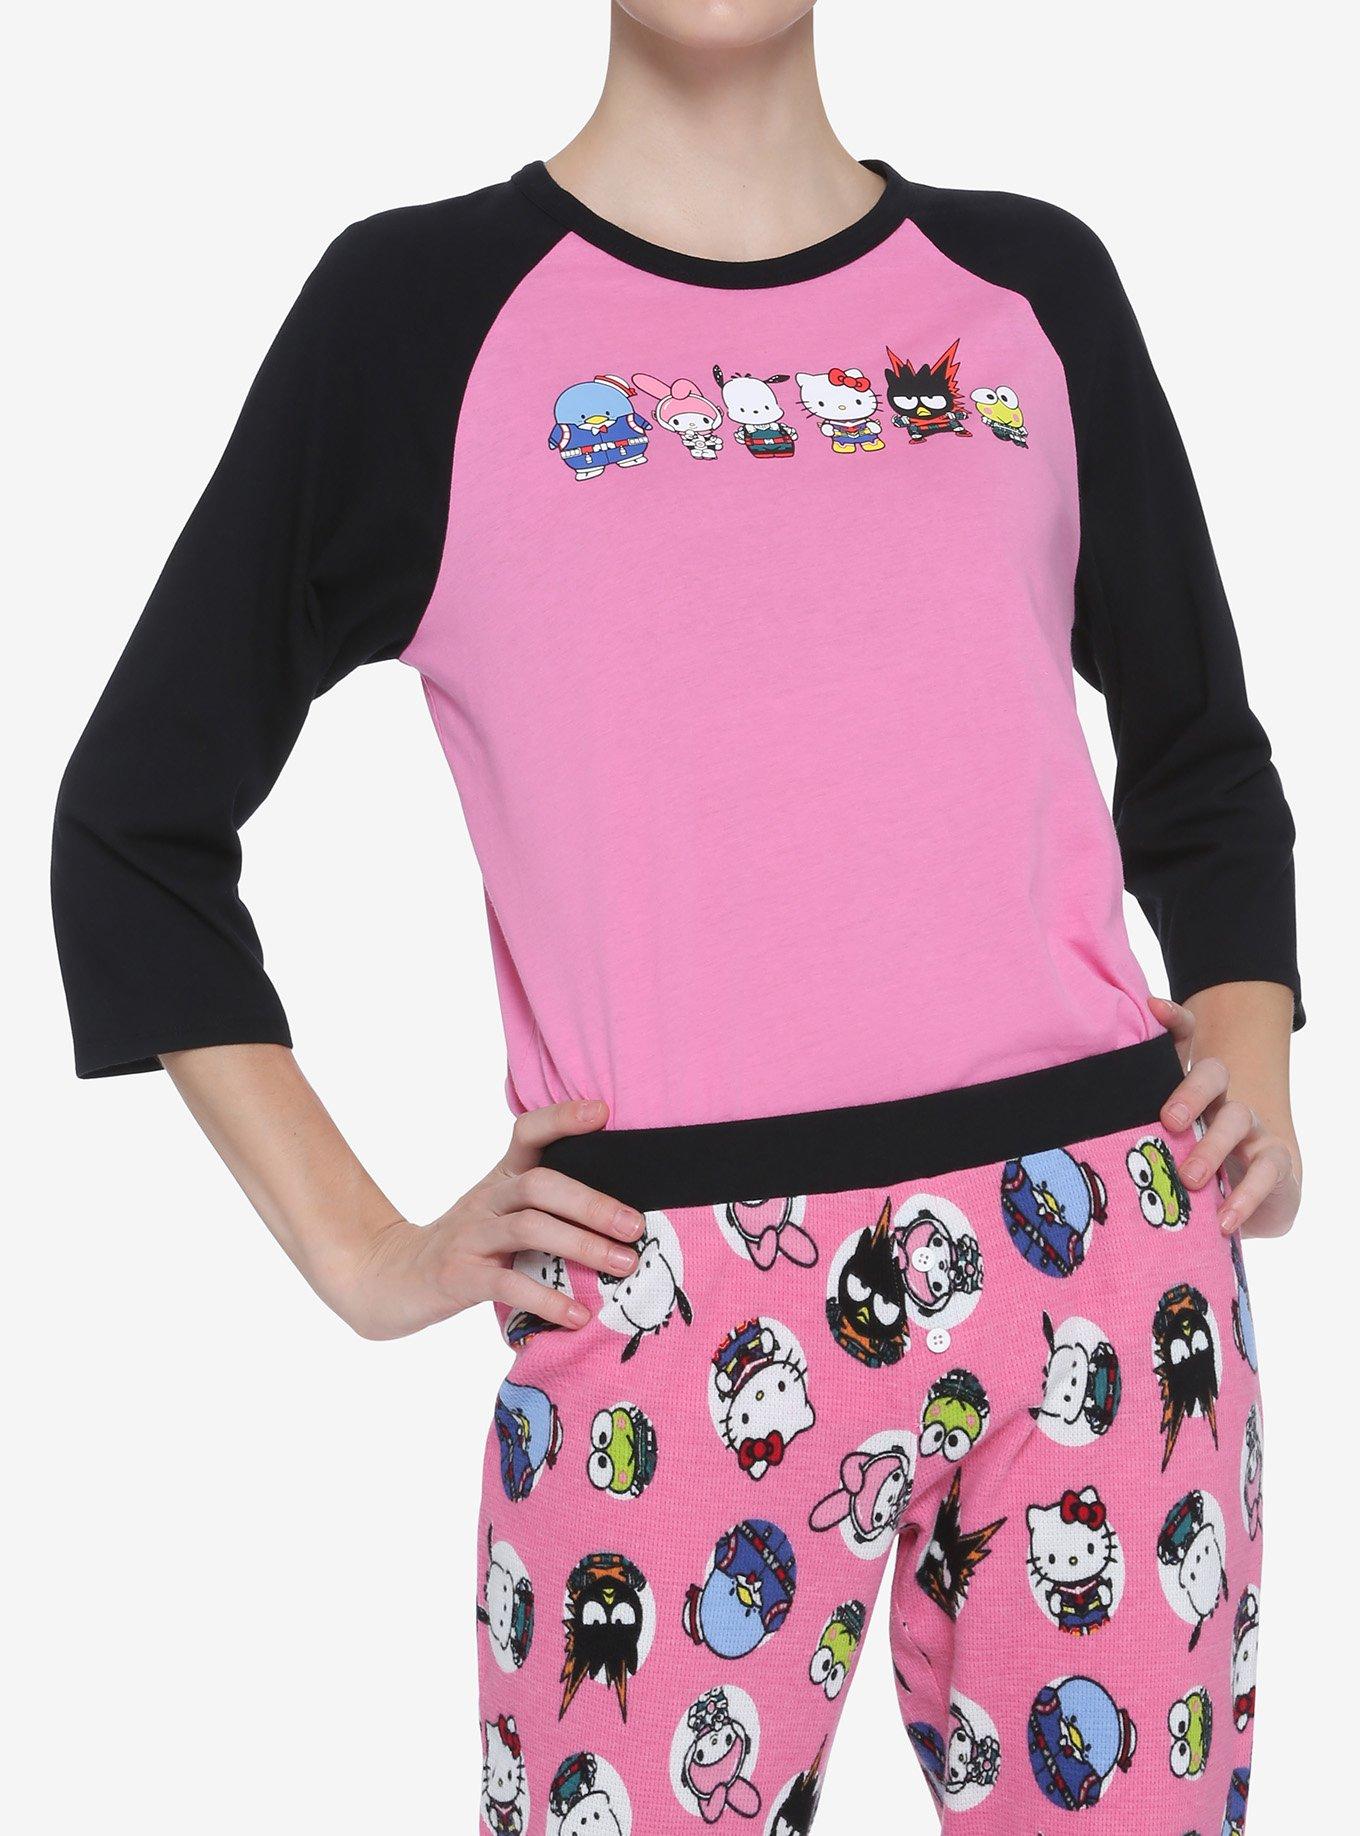 TEZENIS - Get into the Hello Kitty world with our new PJ!🌈, 1PL1191A, #hellokittyxtezenis >